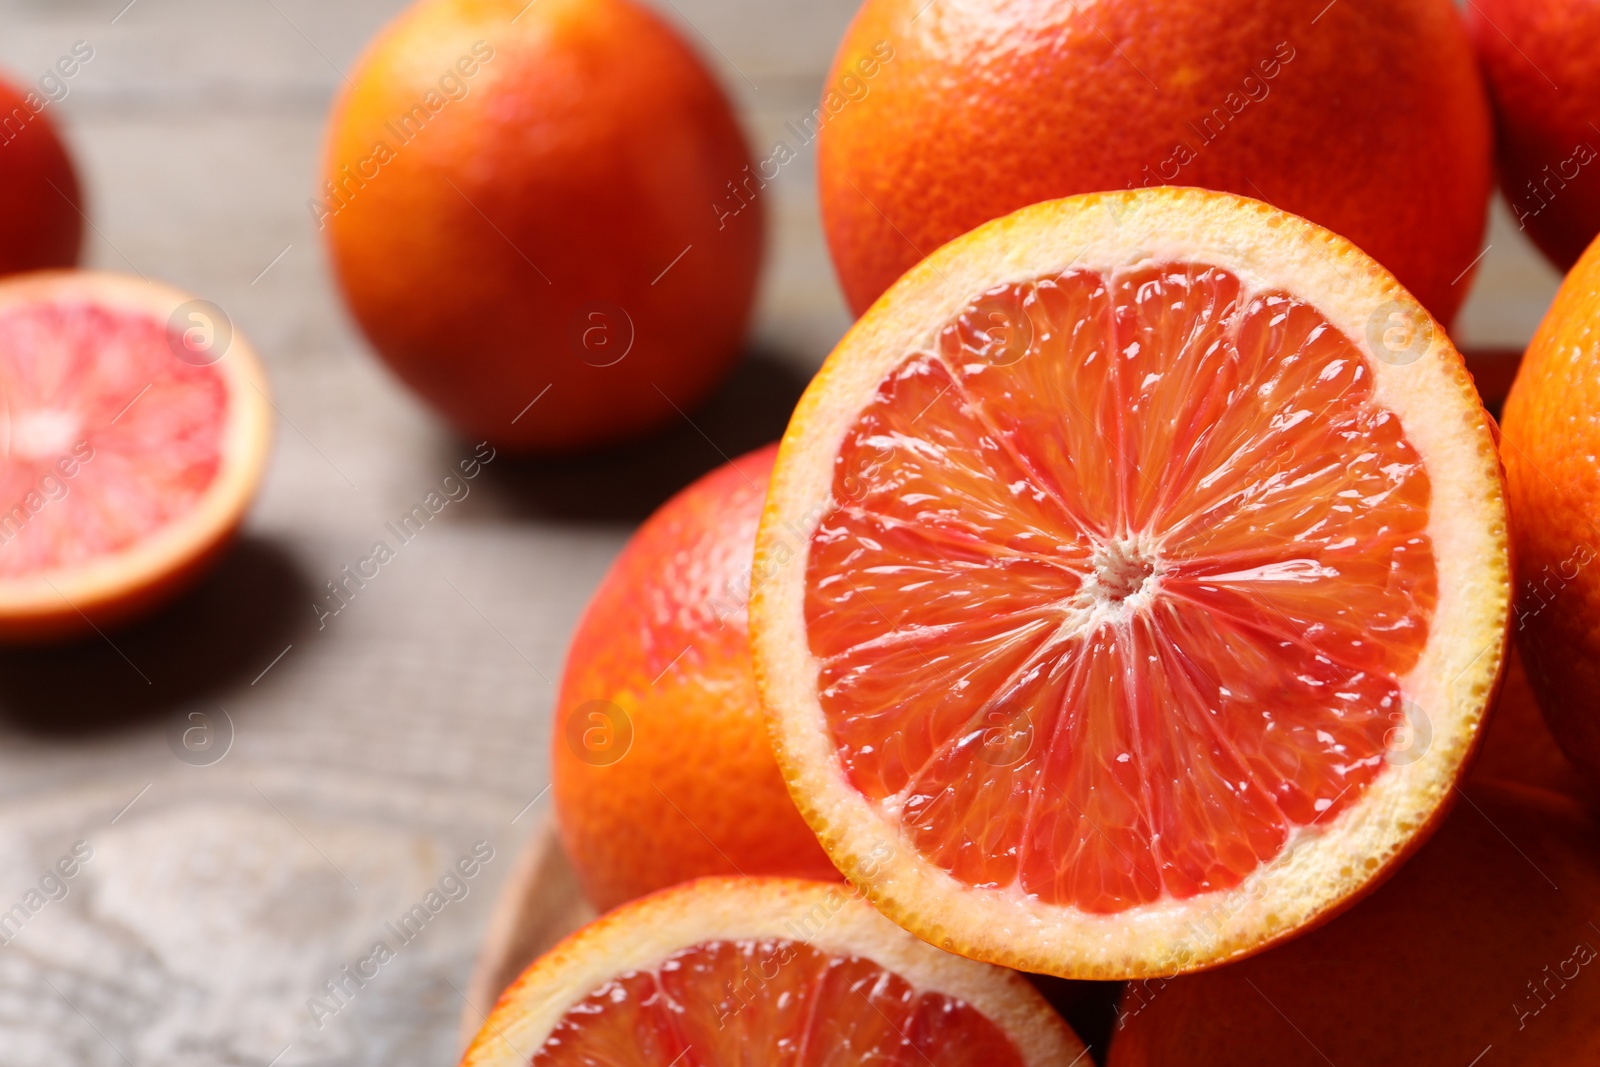 Photo of Whole and cut red oranges on wooden table, closeup